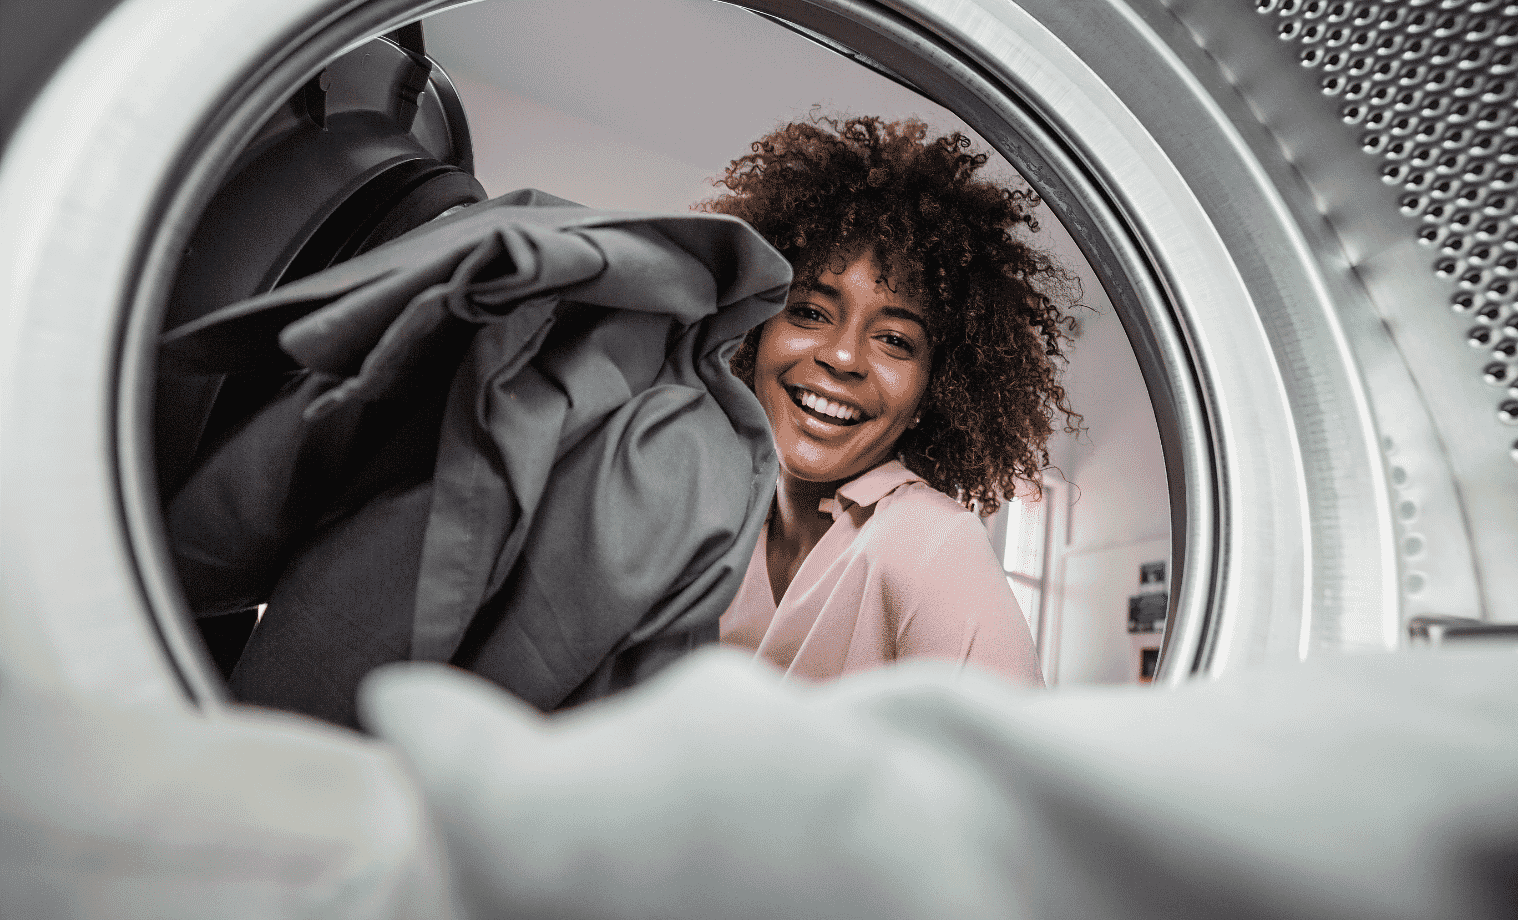 Smiling Woman loading clothes into her new clothes dryer